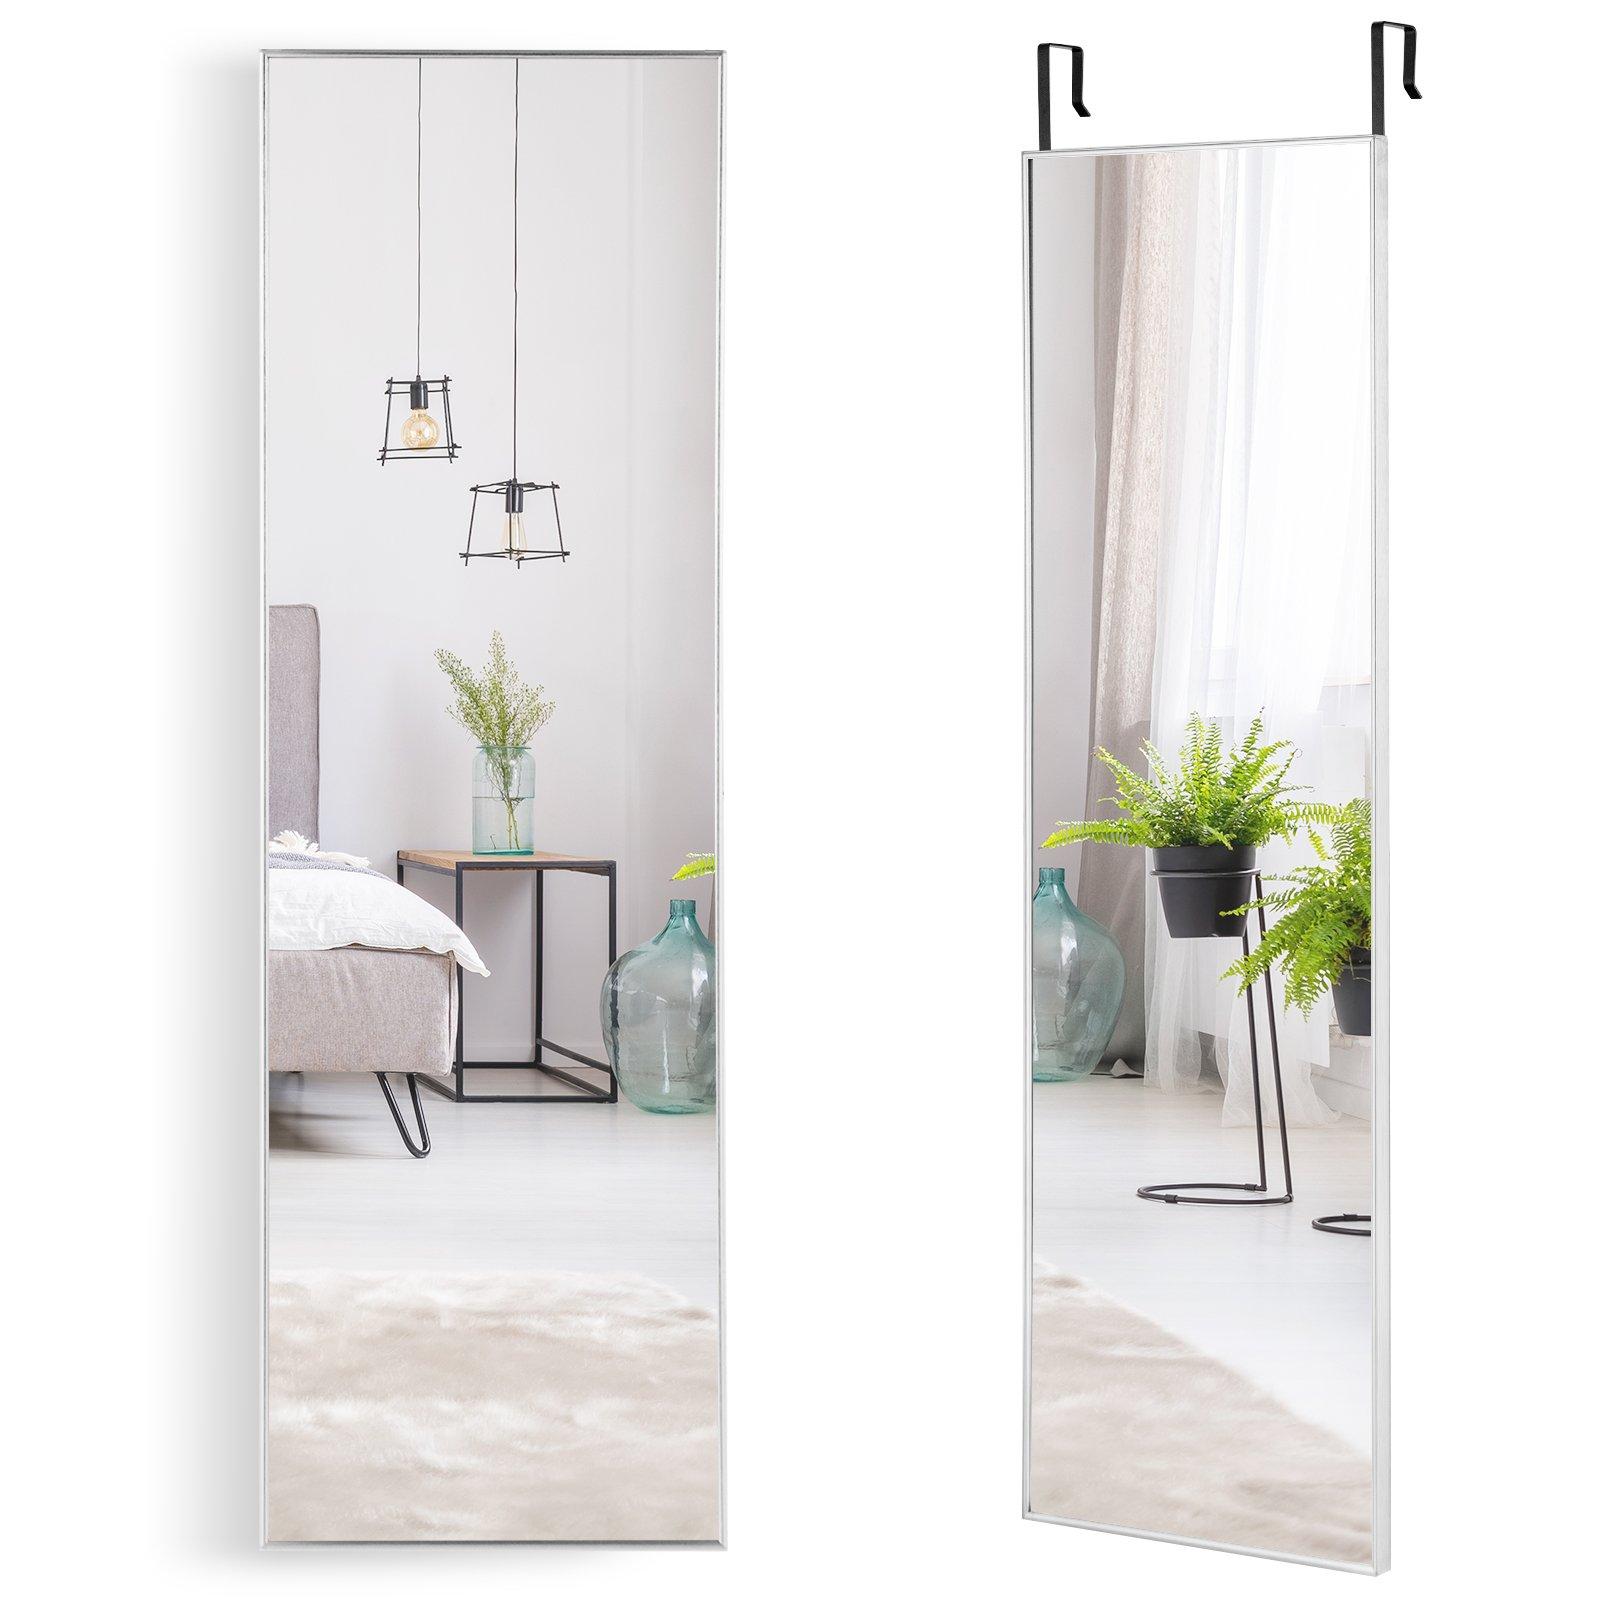 Full-length Over the Door Mirror Hanging & Wall-mounted Dressing Mirror